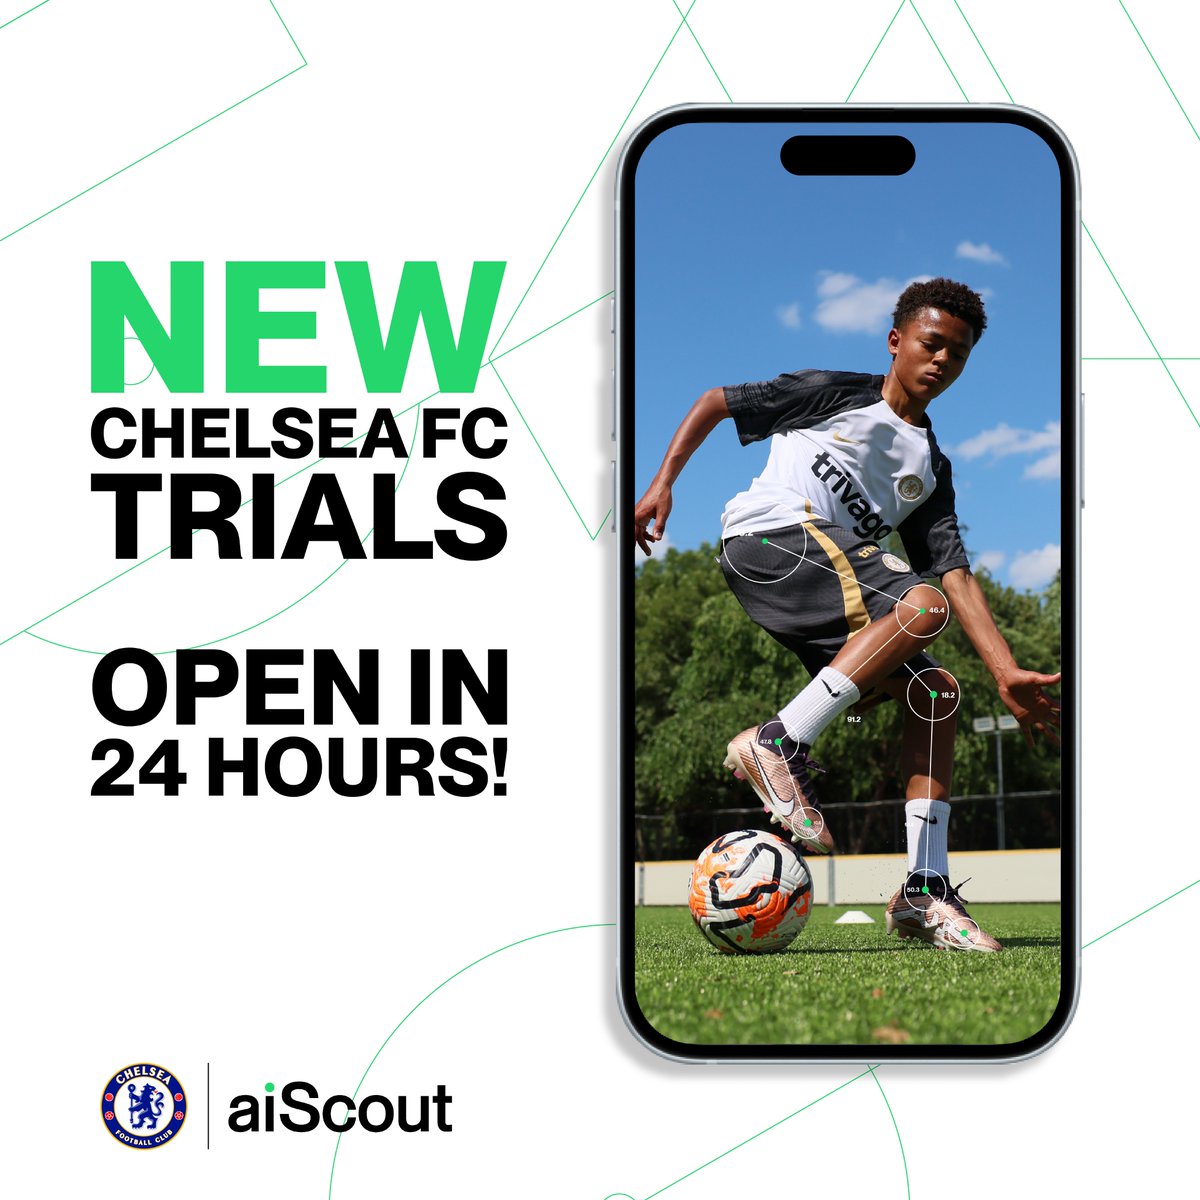 New @ChelseaFC trials open in just 24 hours in the aiScout app Make sure you have downloaded the lastest version of the app, and keep an eye out for the trials opening this Friday.